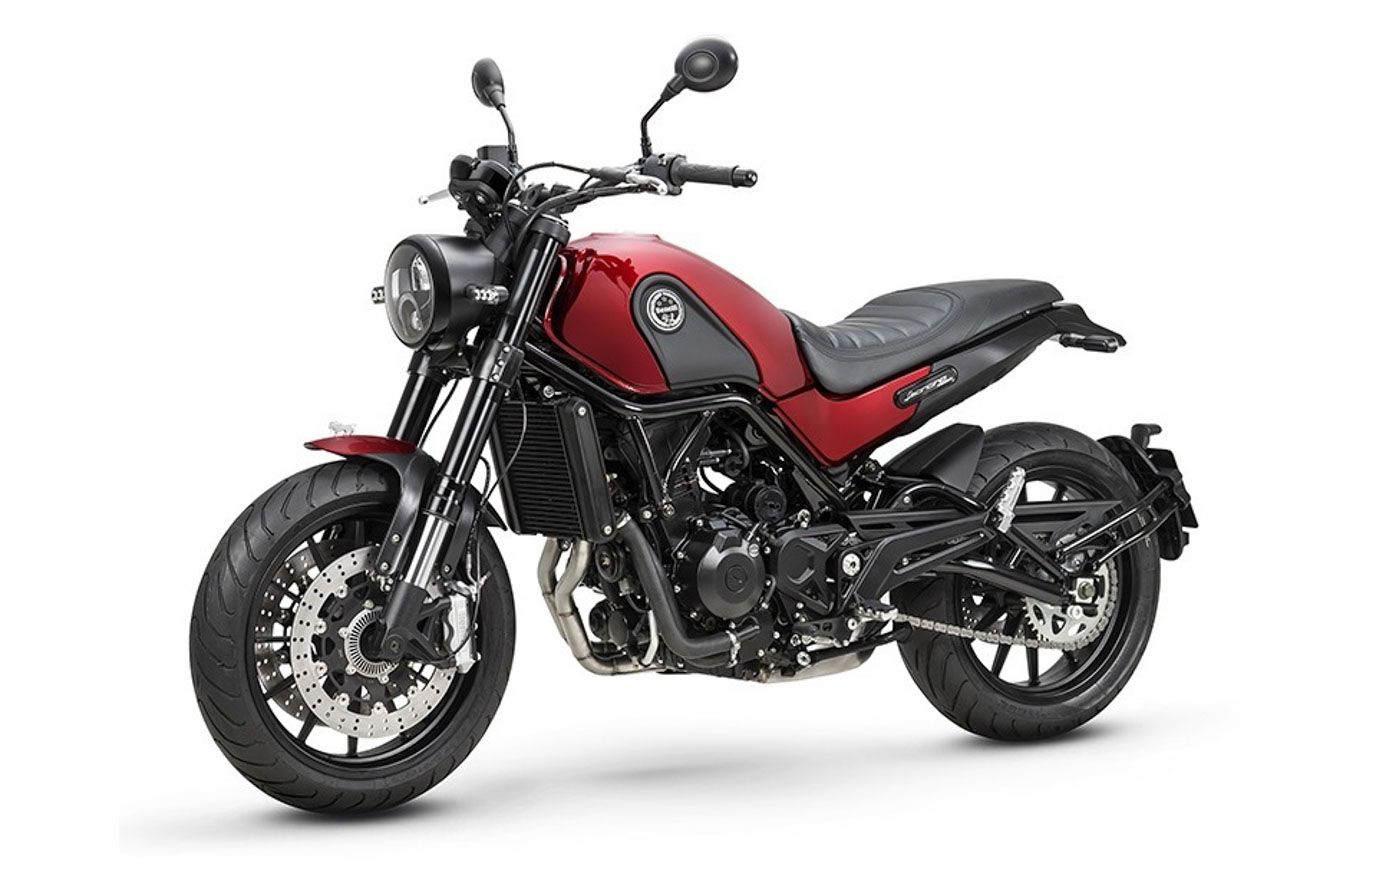 BS6 Benelli Leoncino 500 Launched From Rs. 4.59 Lakh Onwards